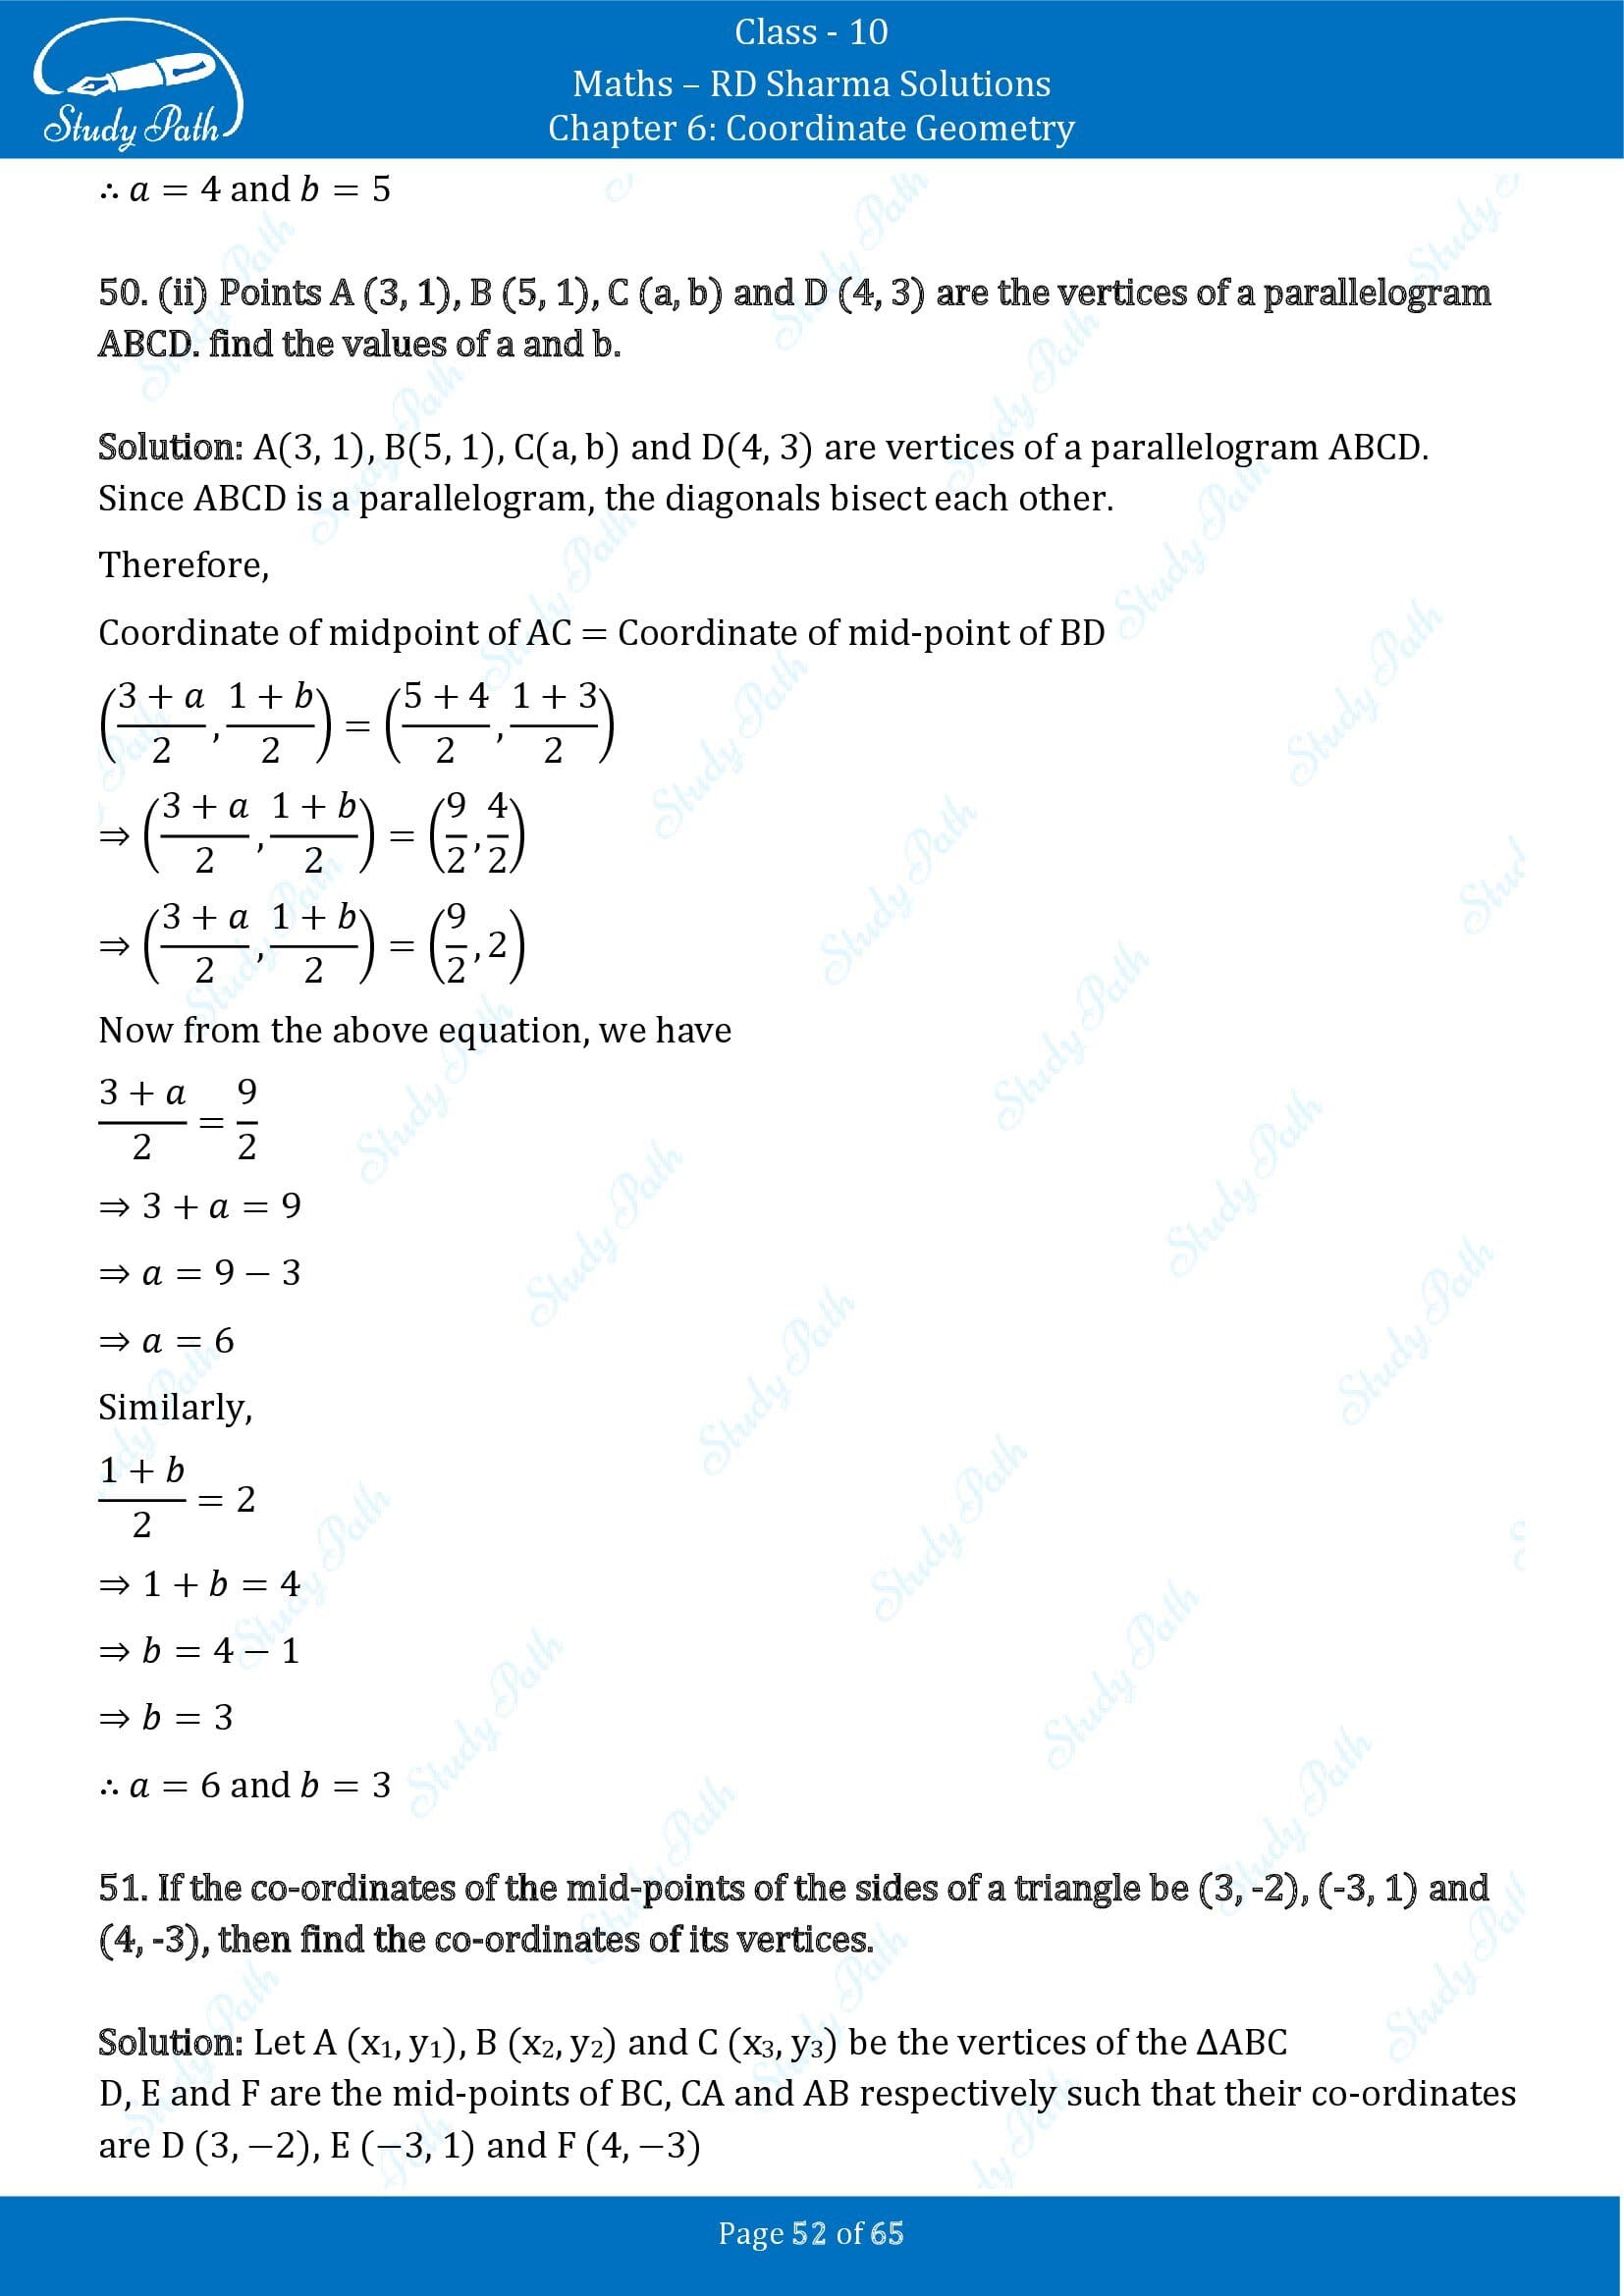 RD Sharma Solutions Class 10 Chapter 6 Coordinate Geometry Exercise 6.3 00052